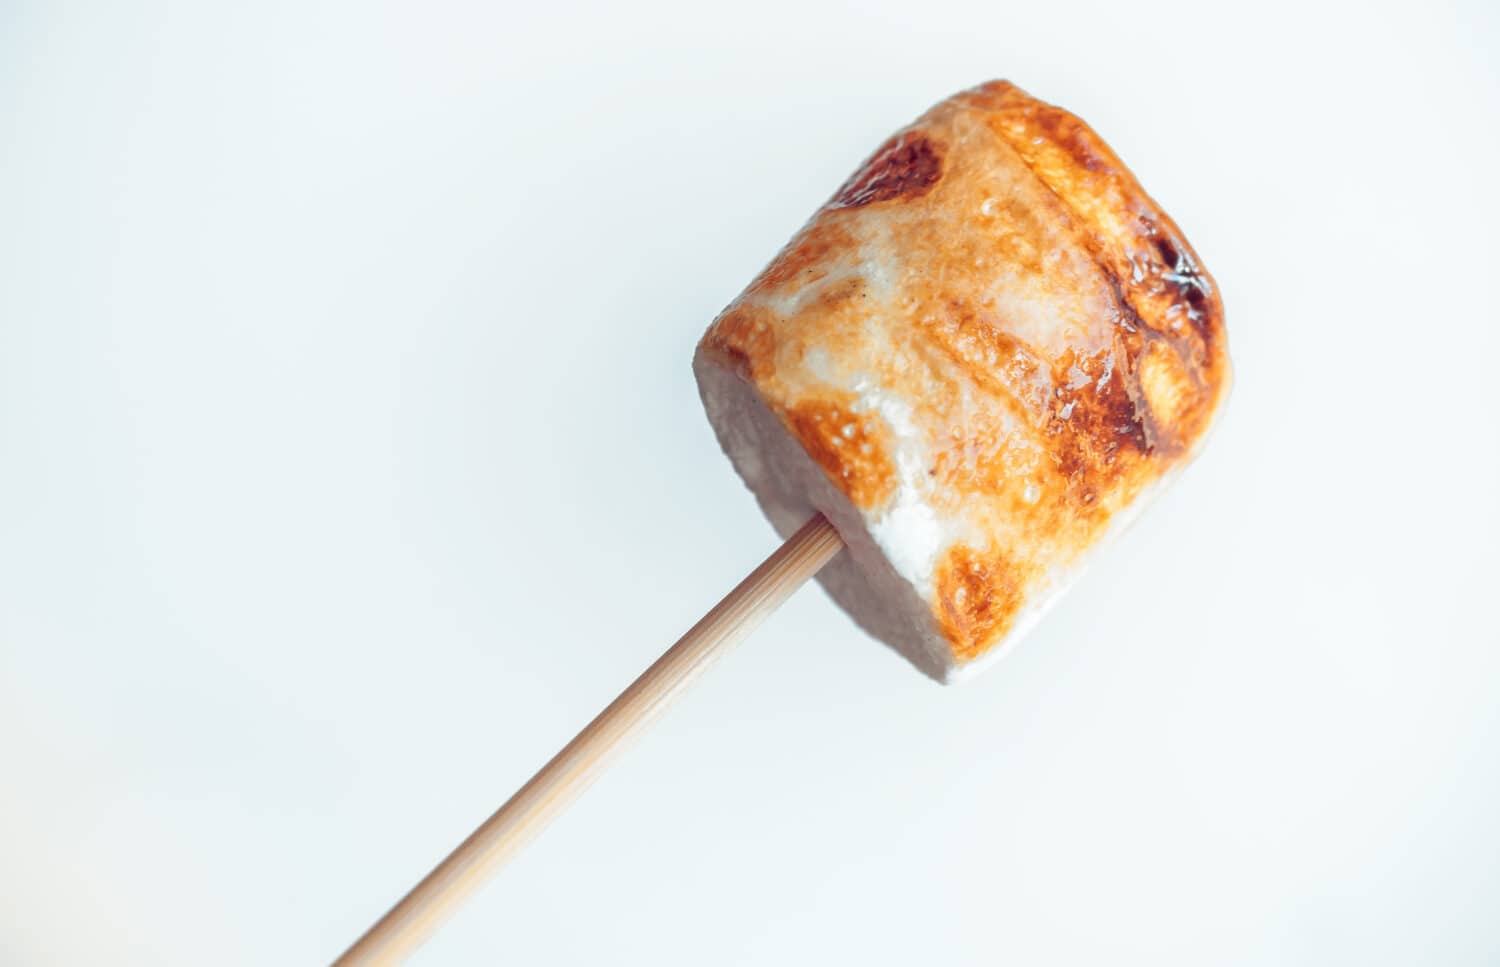 roasted marshmallows on a skewer on white background